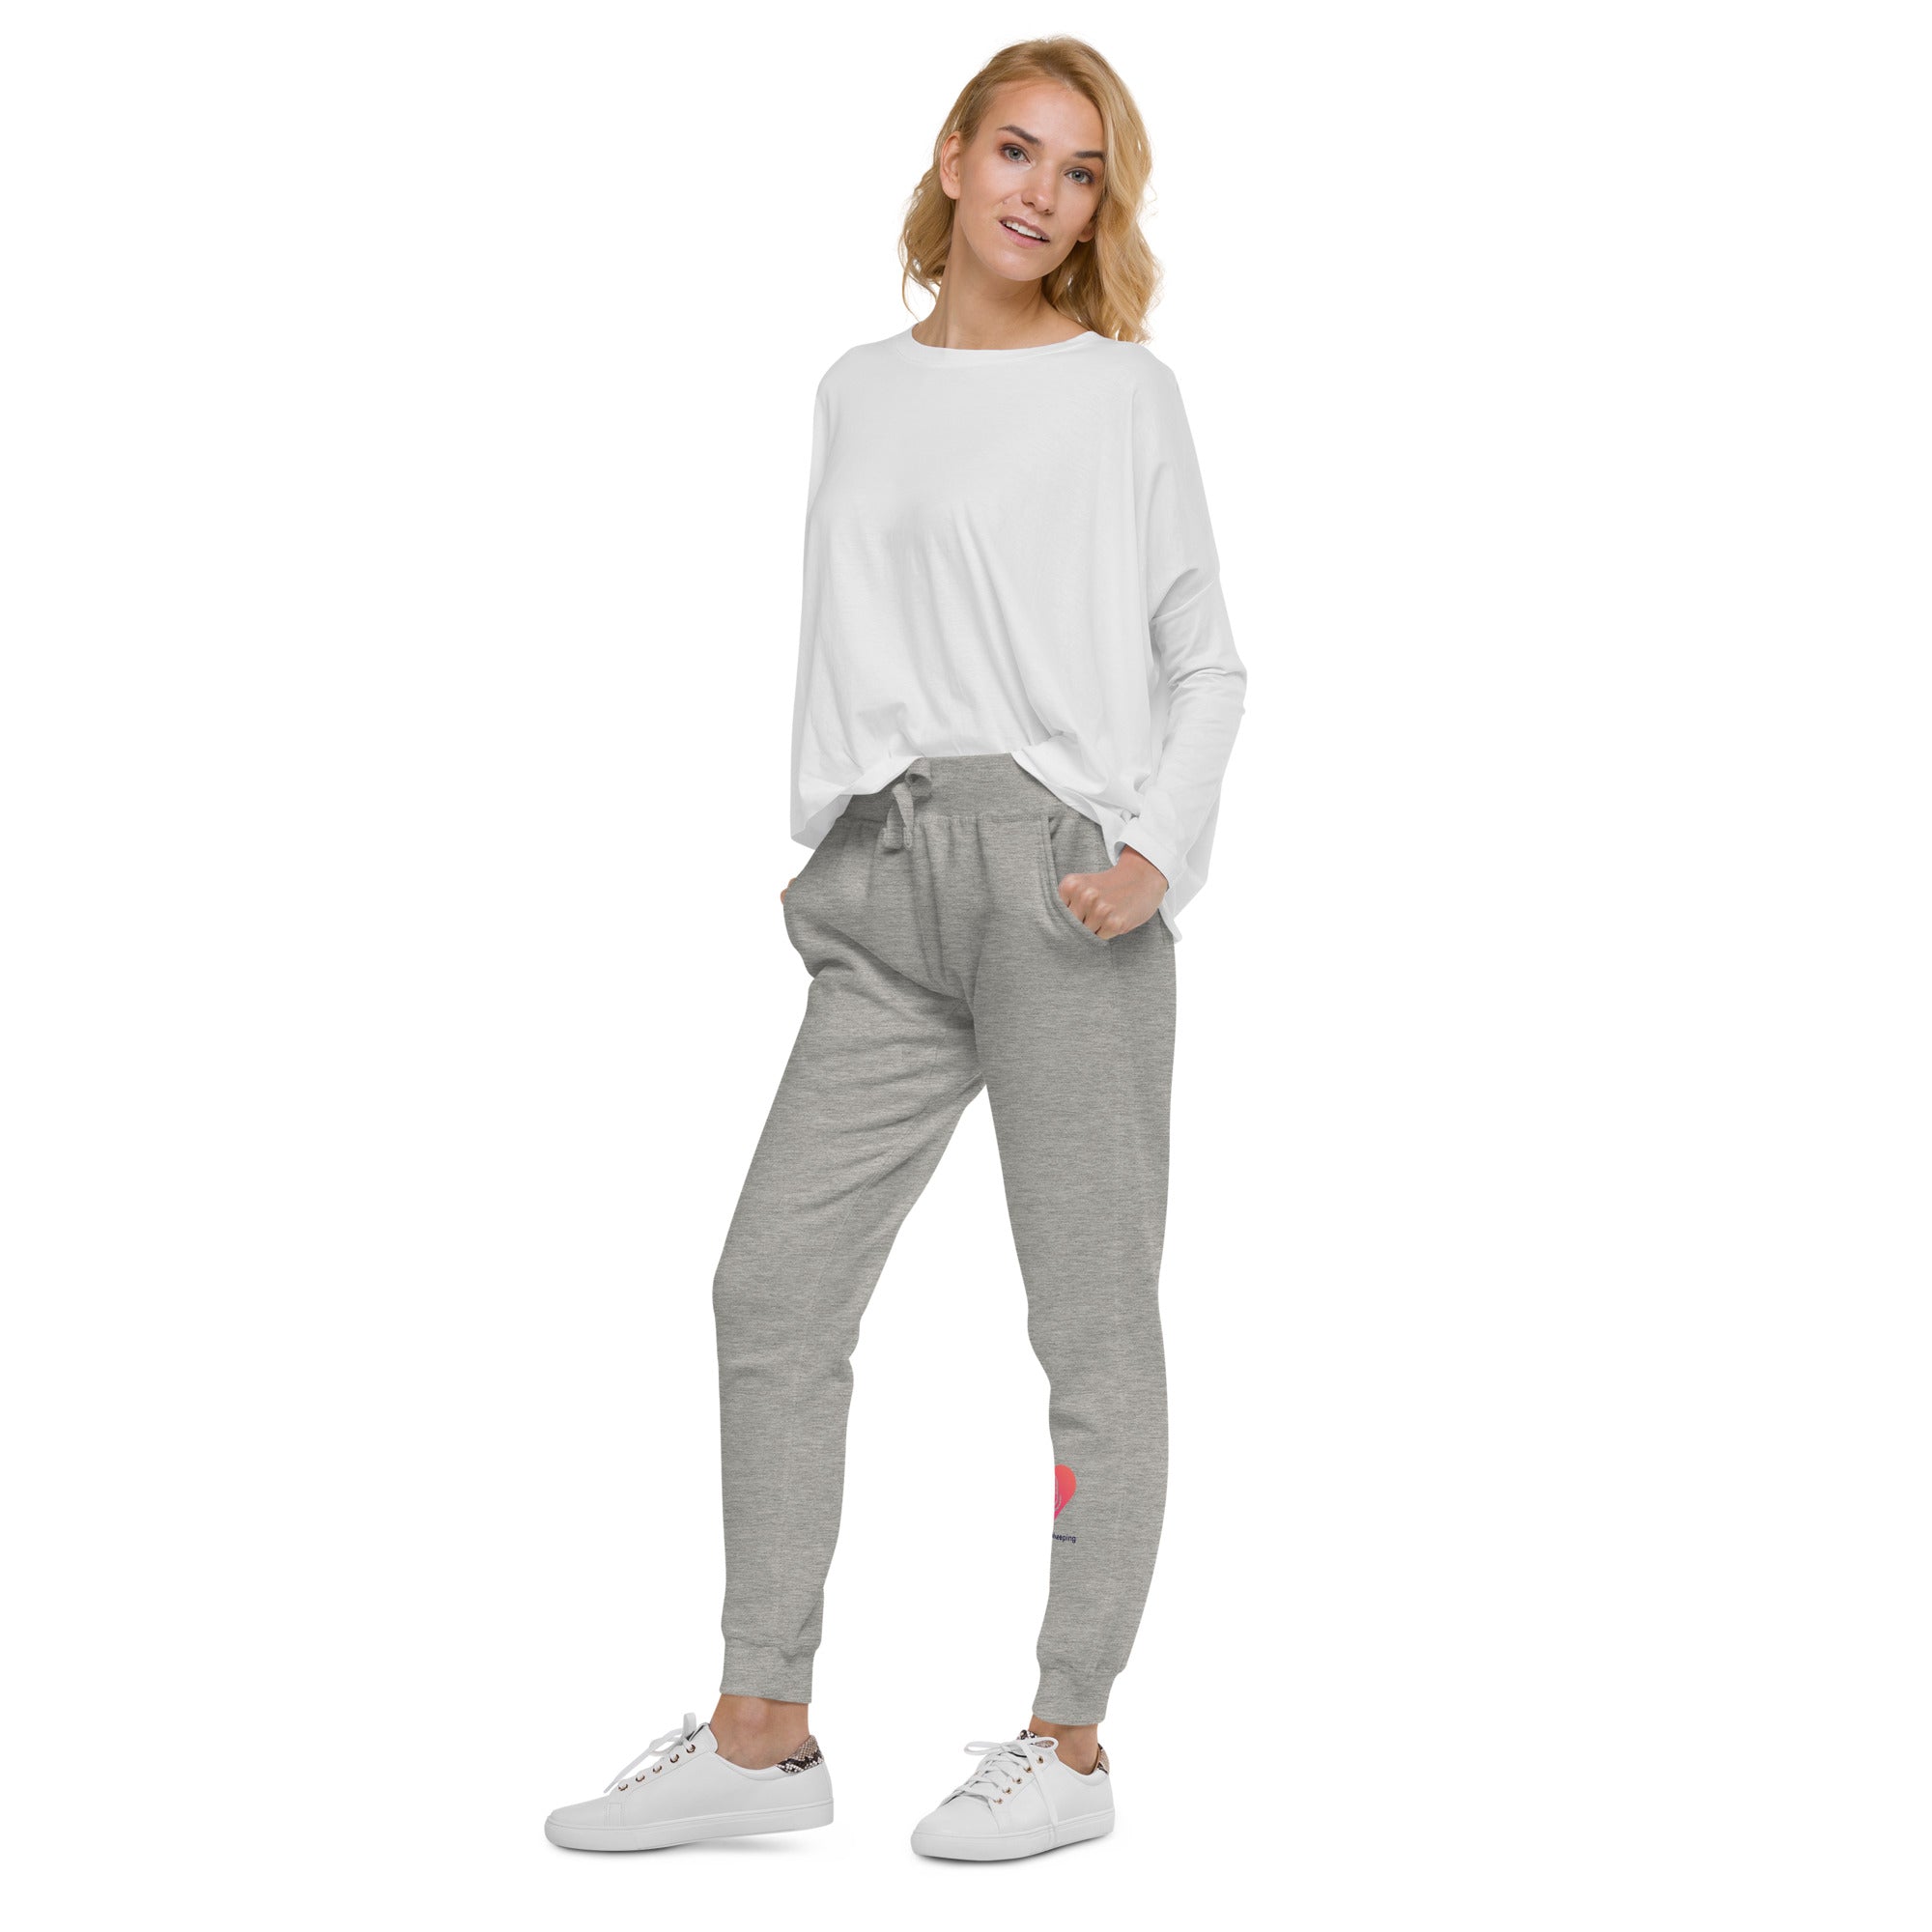 I Love Bookkeeping Unisex fleece sweatpants (More colors available)